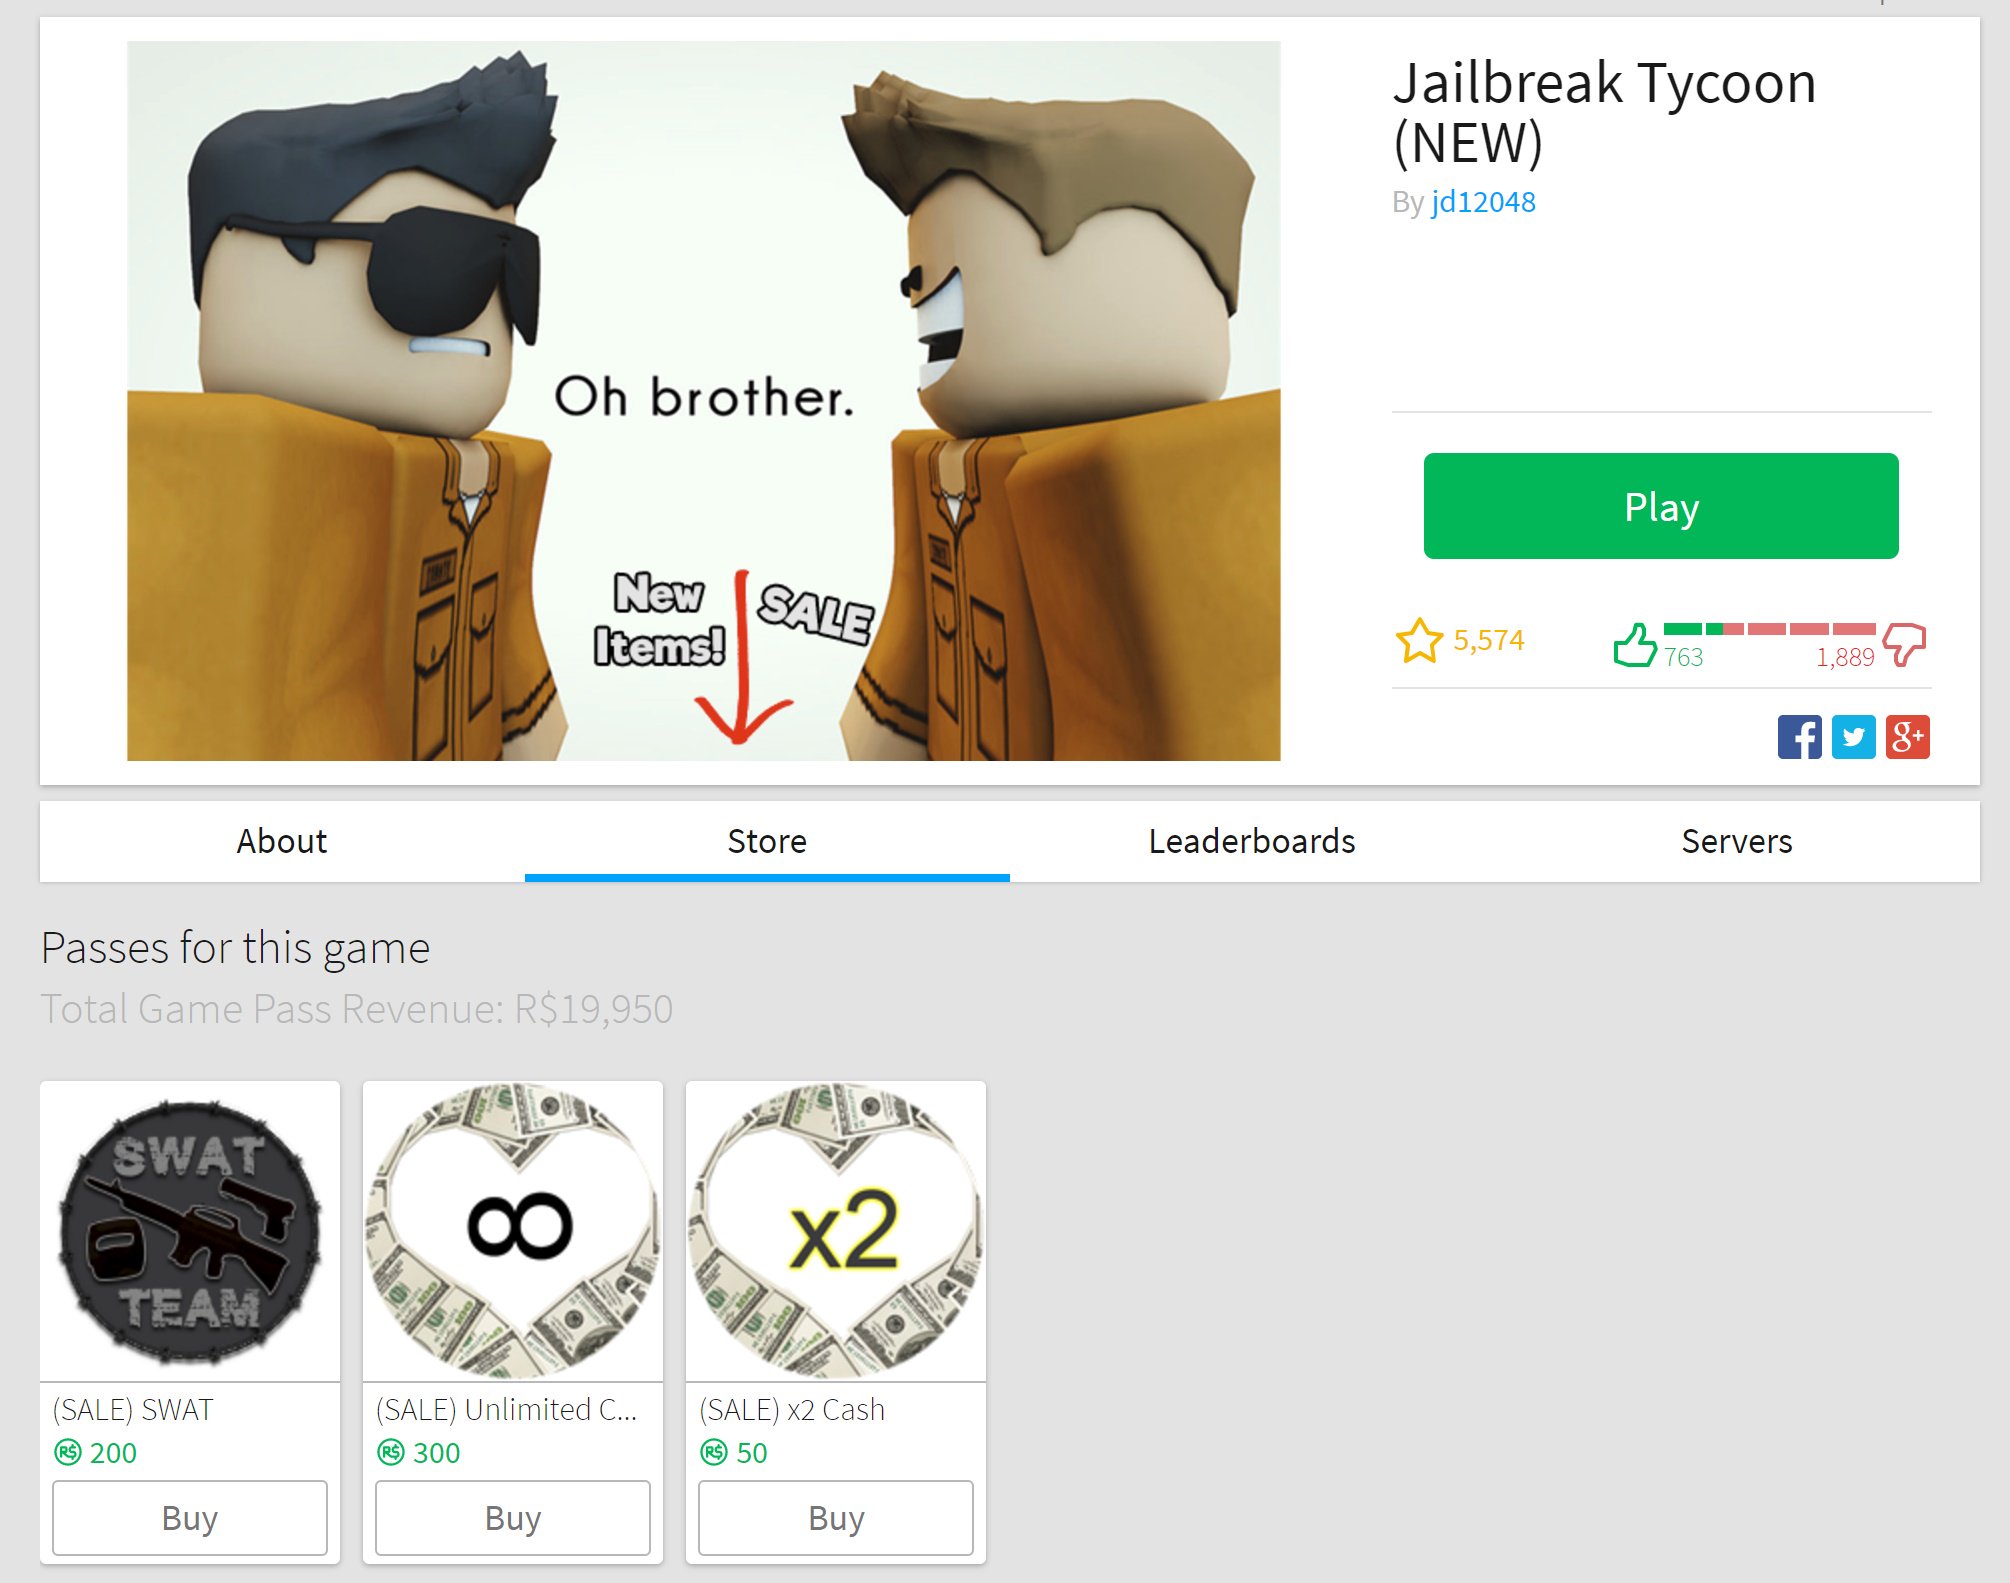 Biggranny000 On Twitter Report This Game They Stole Jailbreak S Jail And Other Assets And Made A Tycoon Out Of It - jailbreak tycoon roblox games sale items look whos back